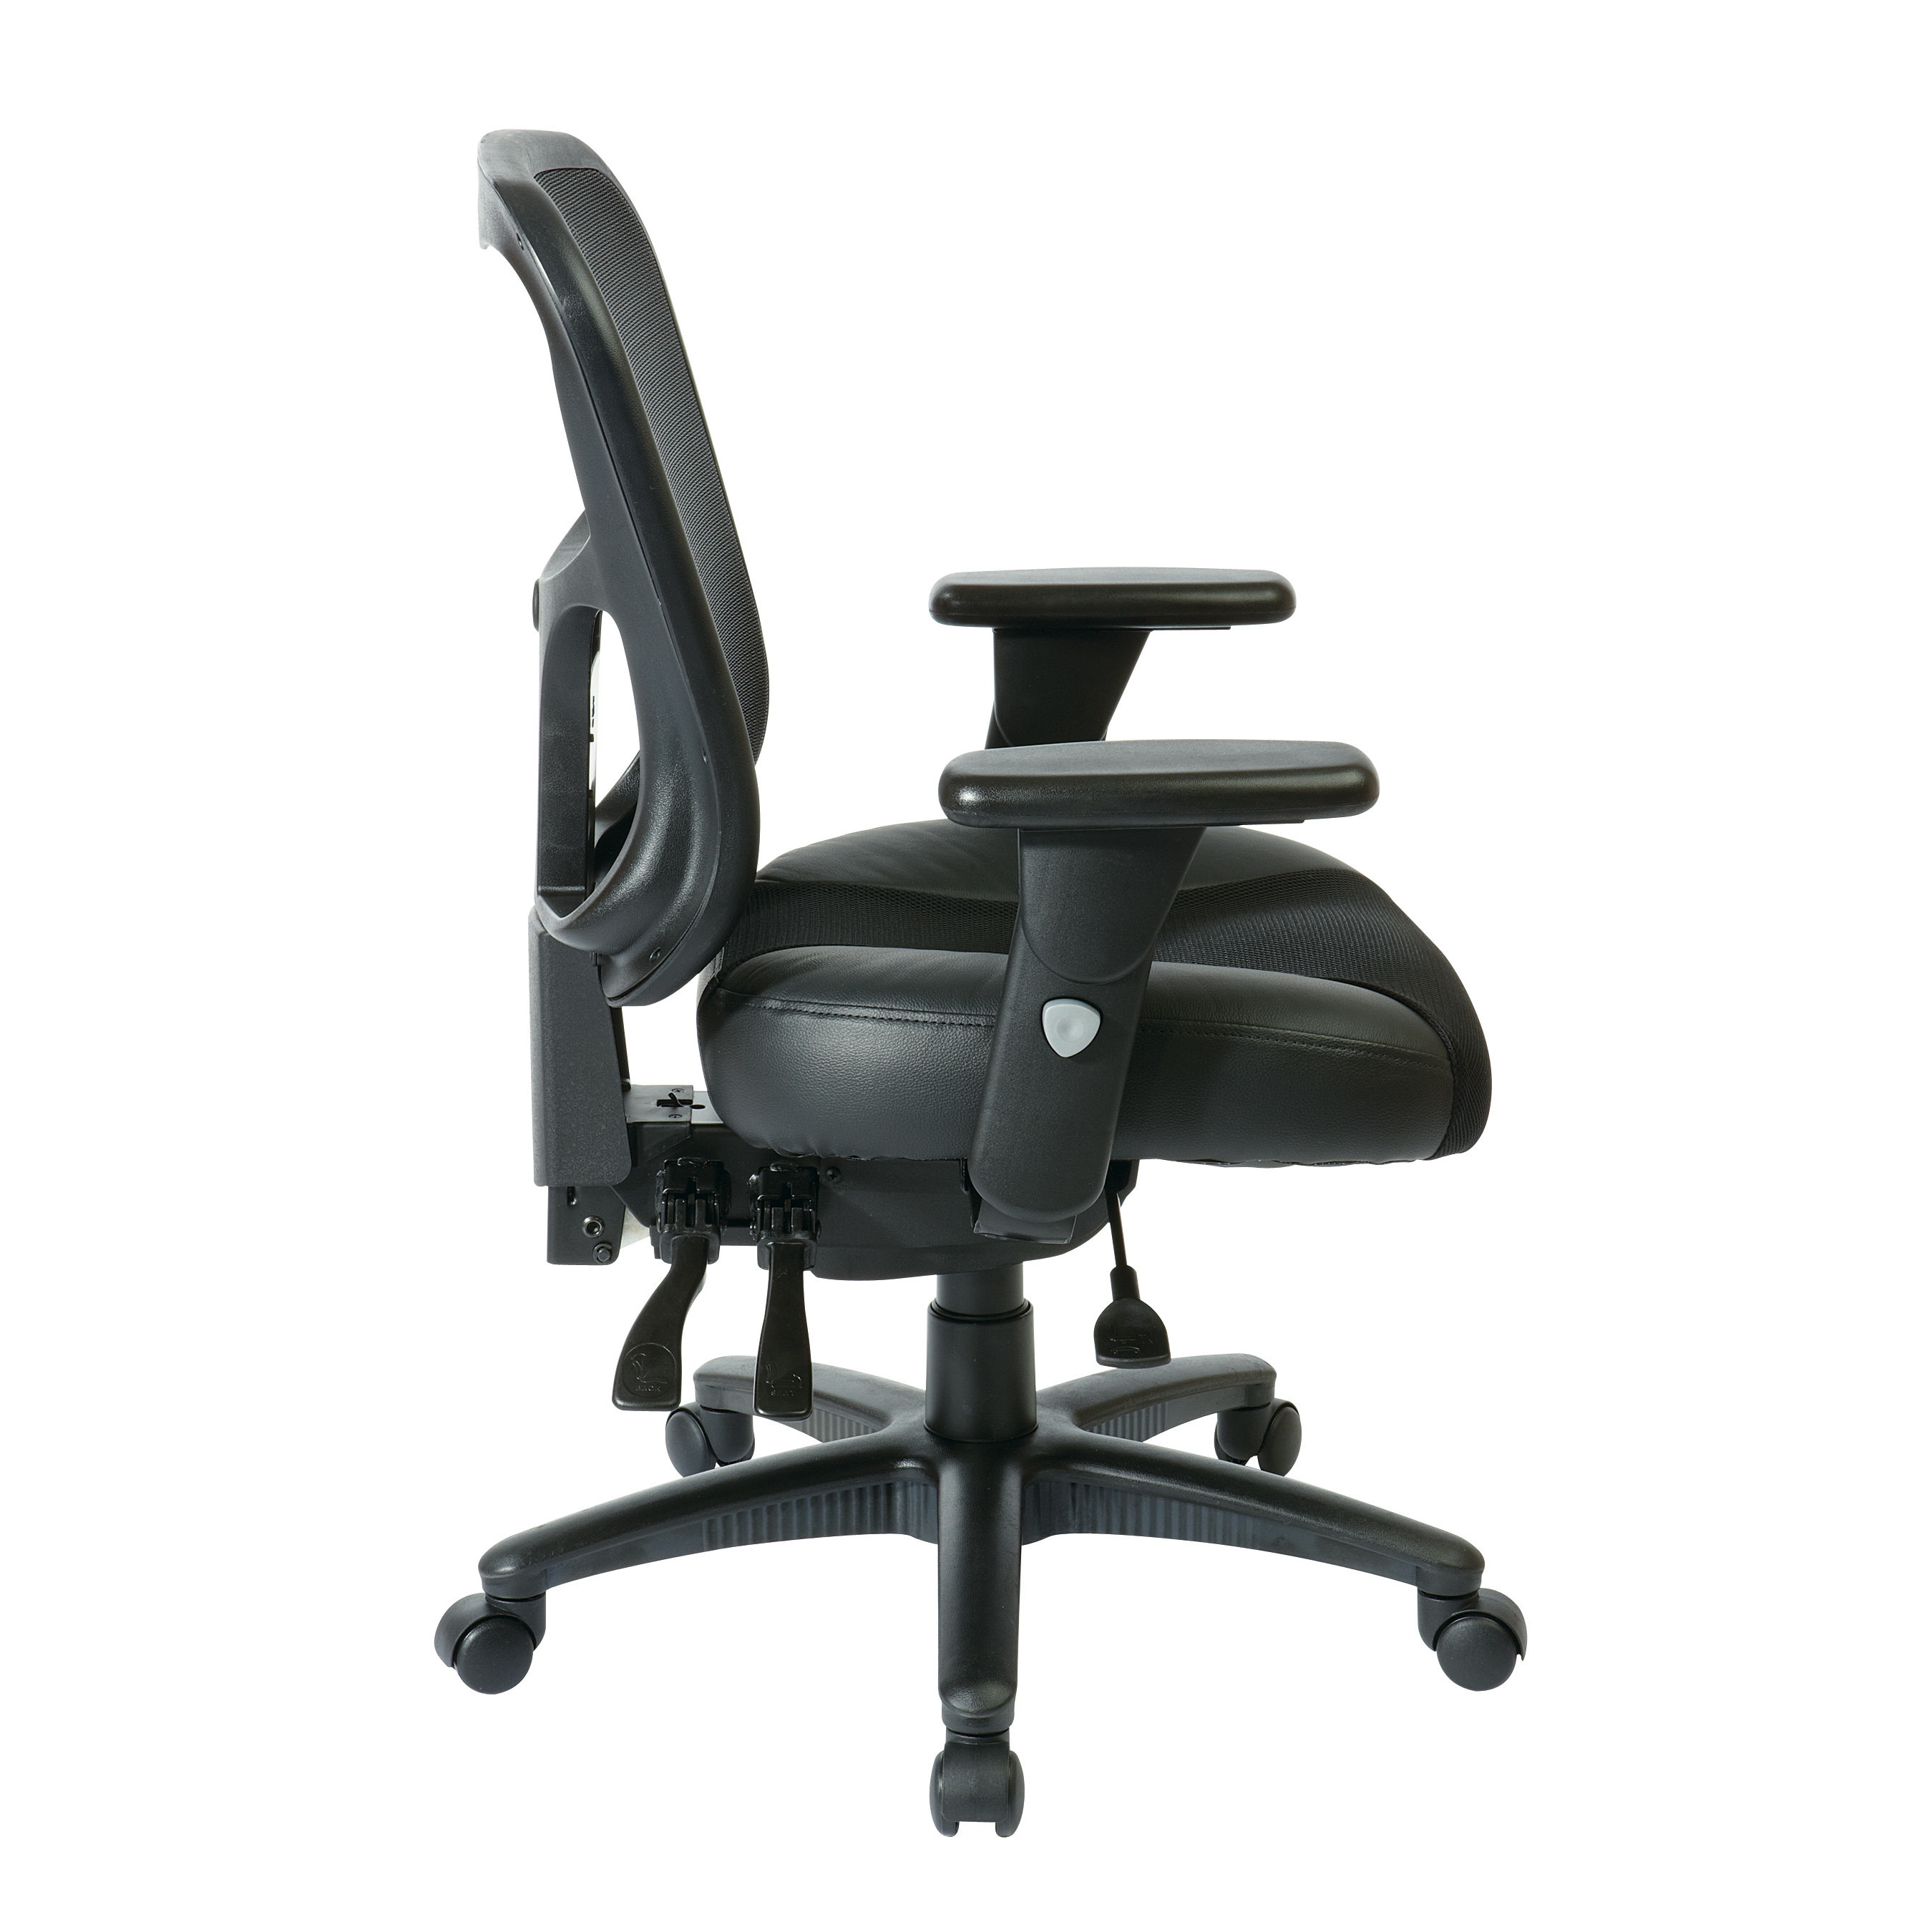 https://ak1.ostkcdn.com/images/products/8657051/Office-Star-ProGrid-High-Back-Managers-Chair-with-Leather-and-Mesh-Seat-1bced019-a692-4010-afd0-c3342f8c1f9f.jpg